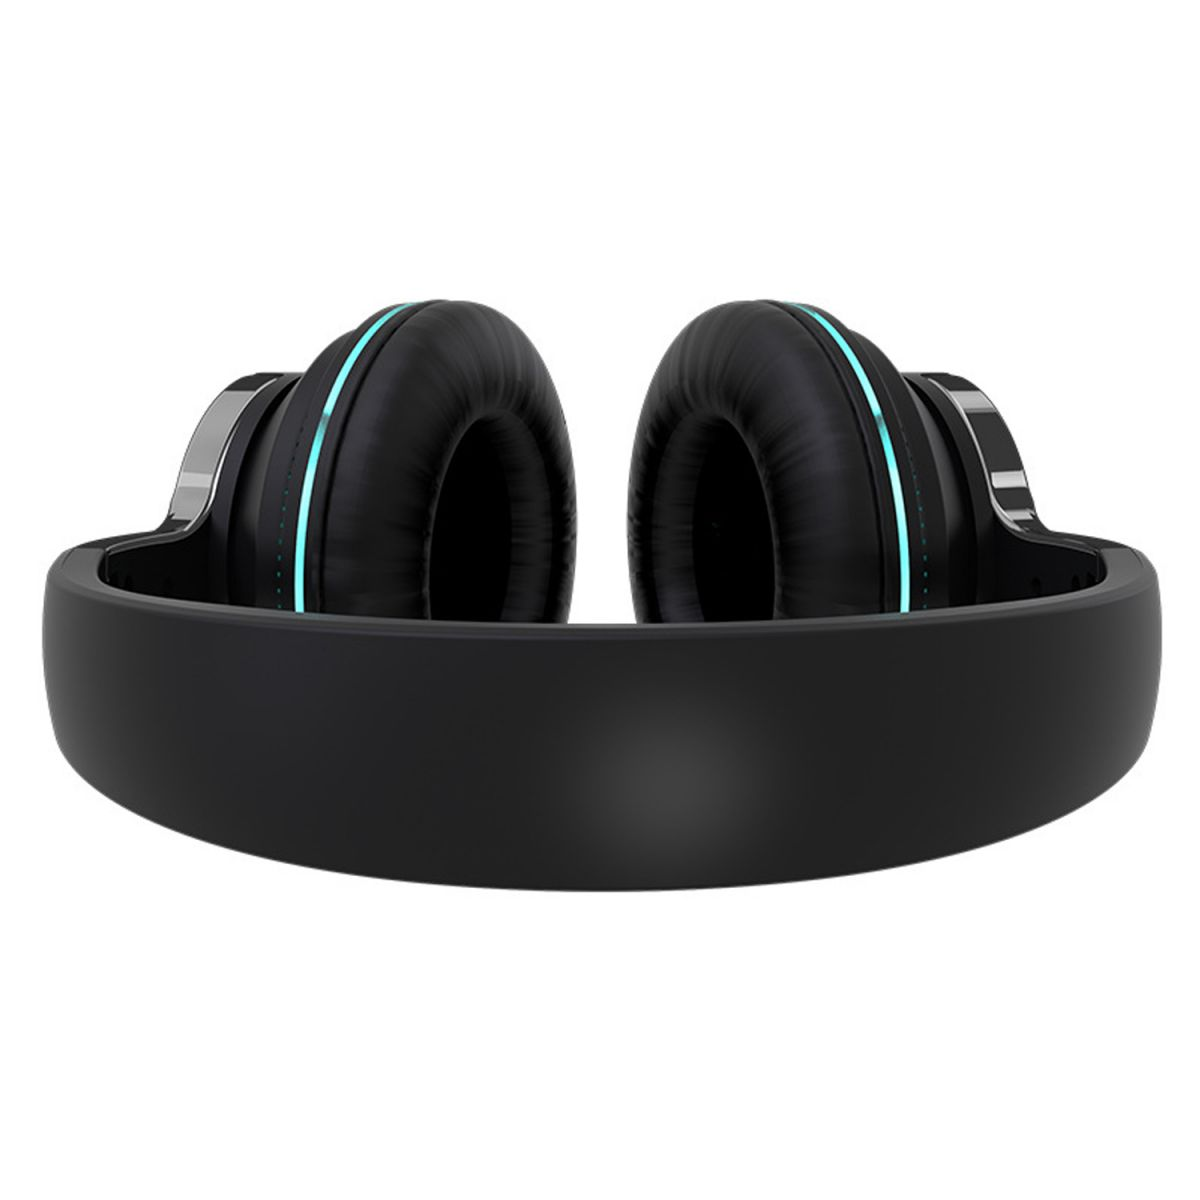 KINSI Over-Ear, Noise-Cancelling, Kabellose Over-ear Kopfhörer schwarz Kopfhörer, Sport-Kopfhörer, Bluetooth Bluetooth-Kopfhörer,